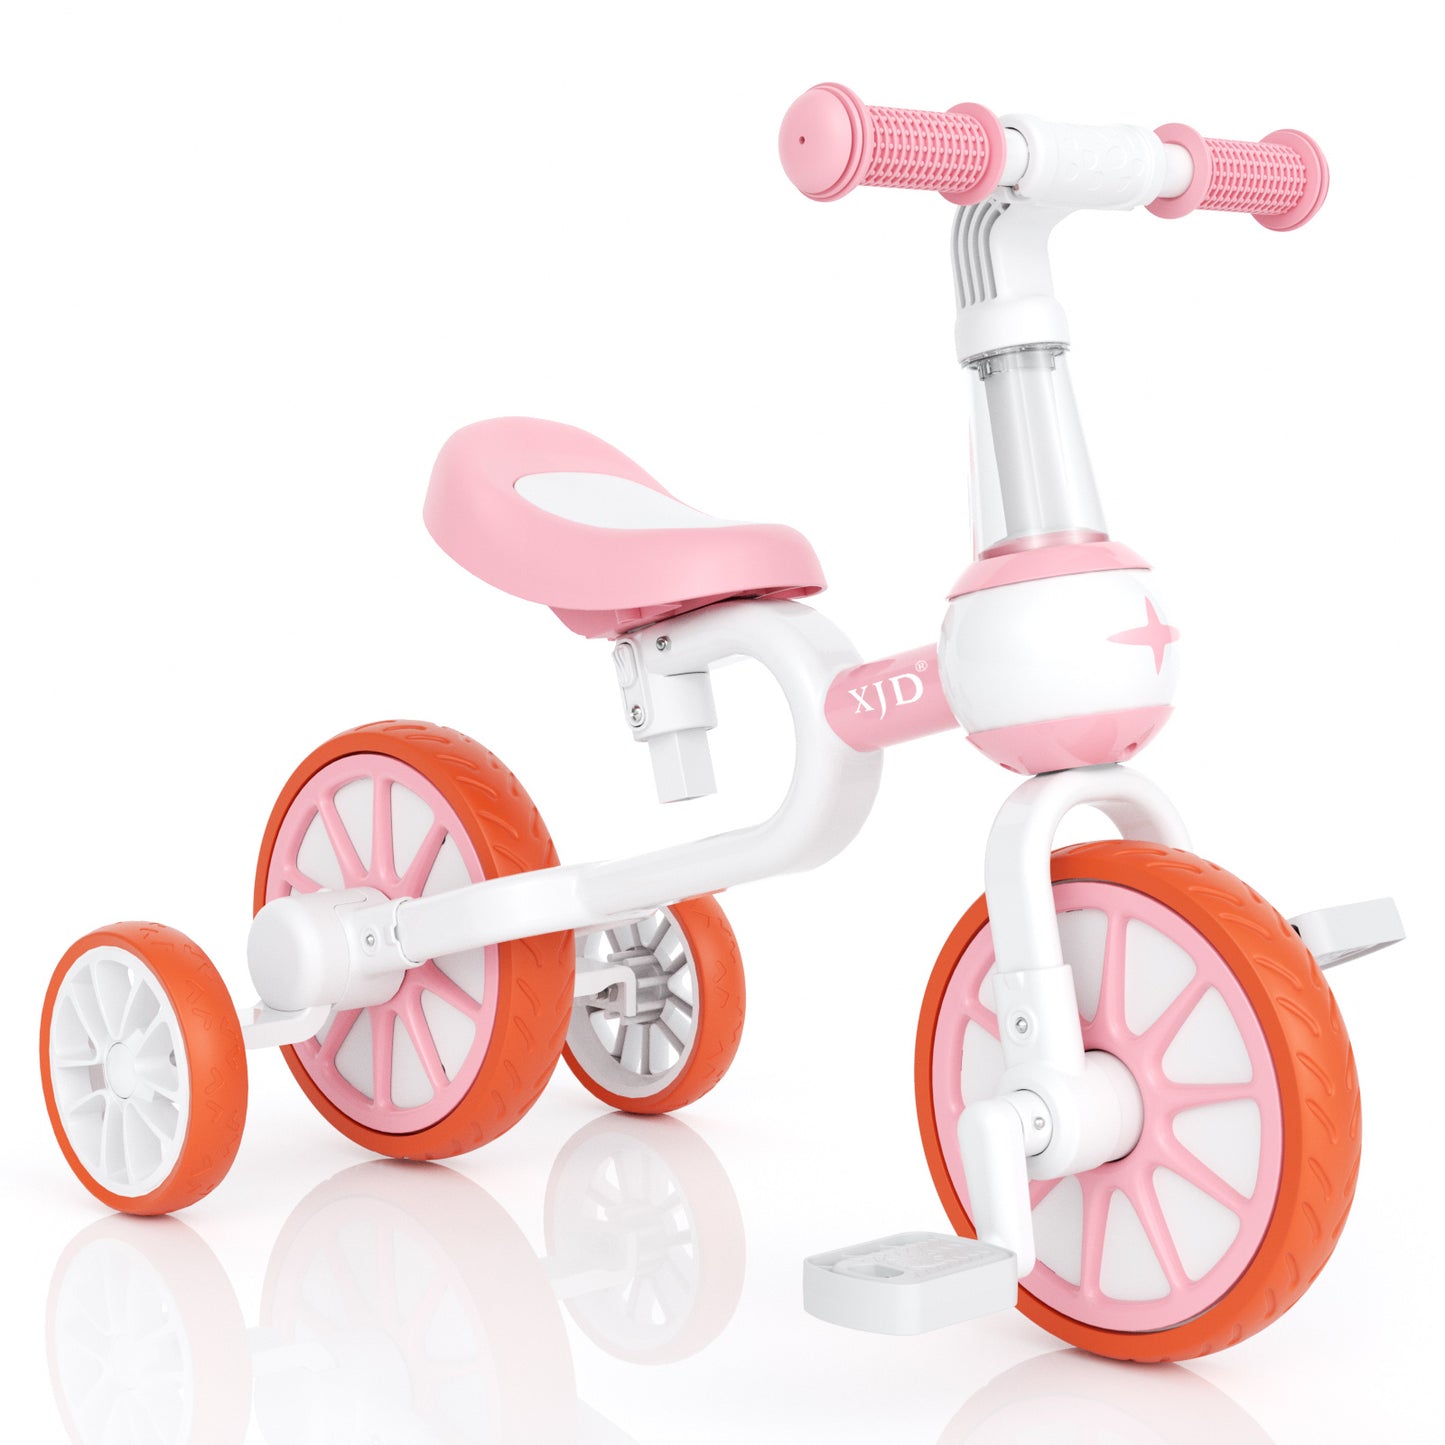 BP206id Balance Bike, 4 in 1 Toddlers Training Bicycle for 2-5 Years Old Boys Girls, Lightweight with Pedals and Training Wheels, Bule